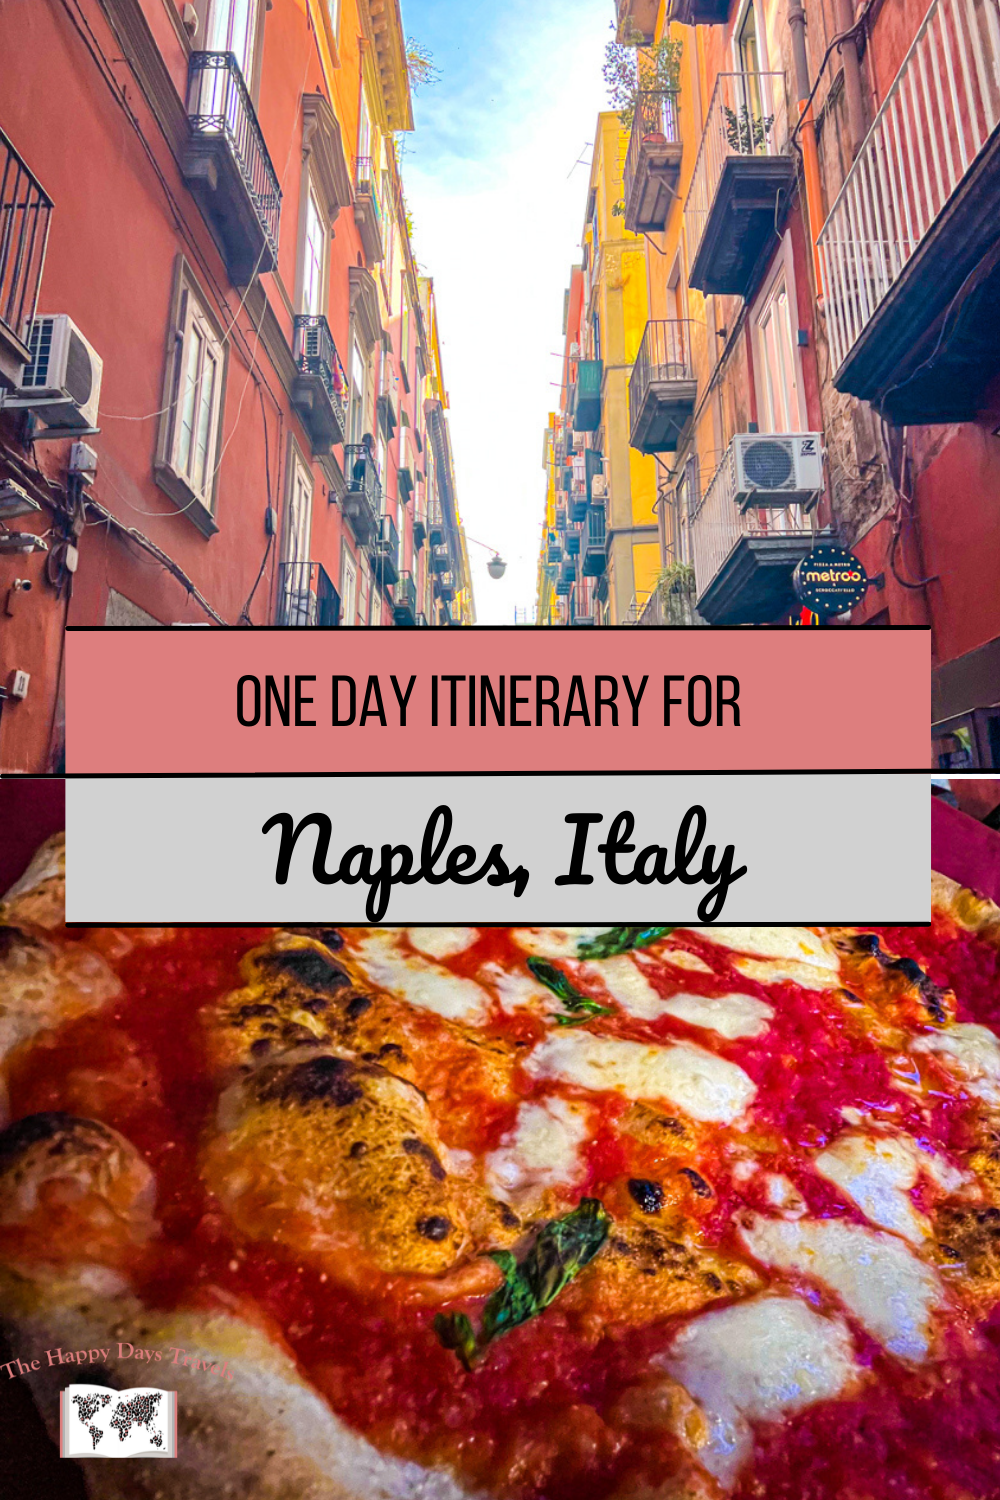 pin image text reads 'one day itinerary for Naples, Italy'. top image of a Naples street and bottom image of a Naples pizza